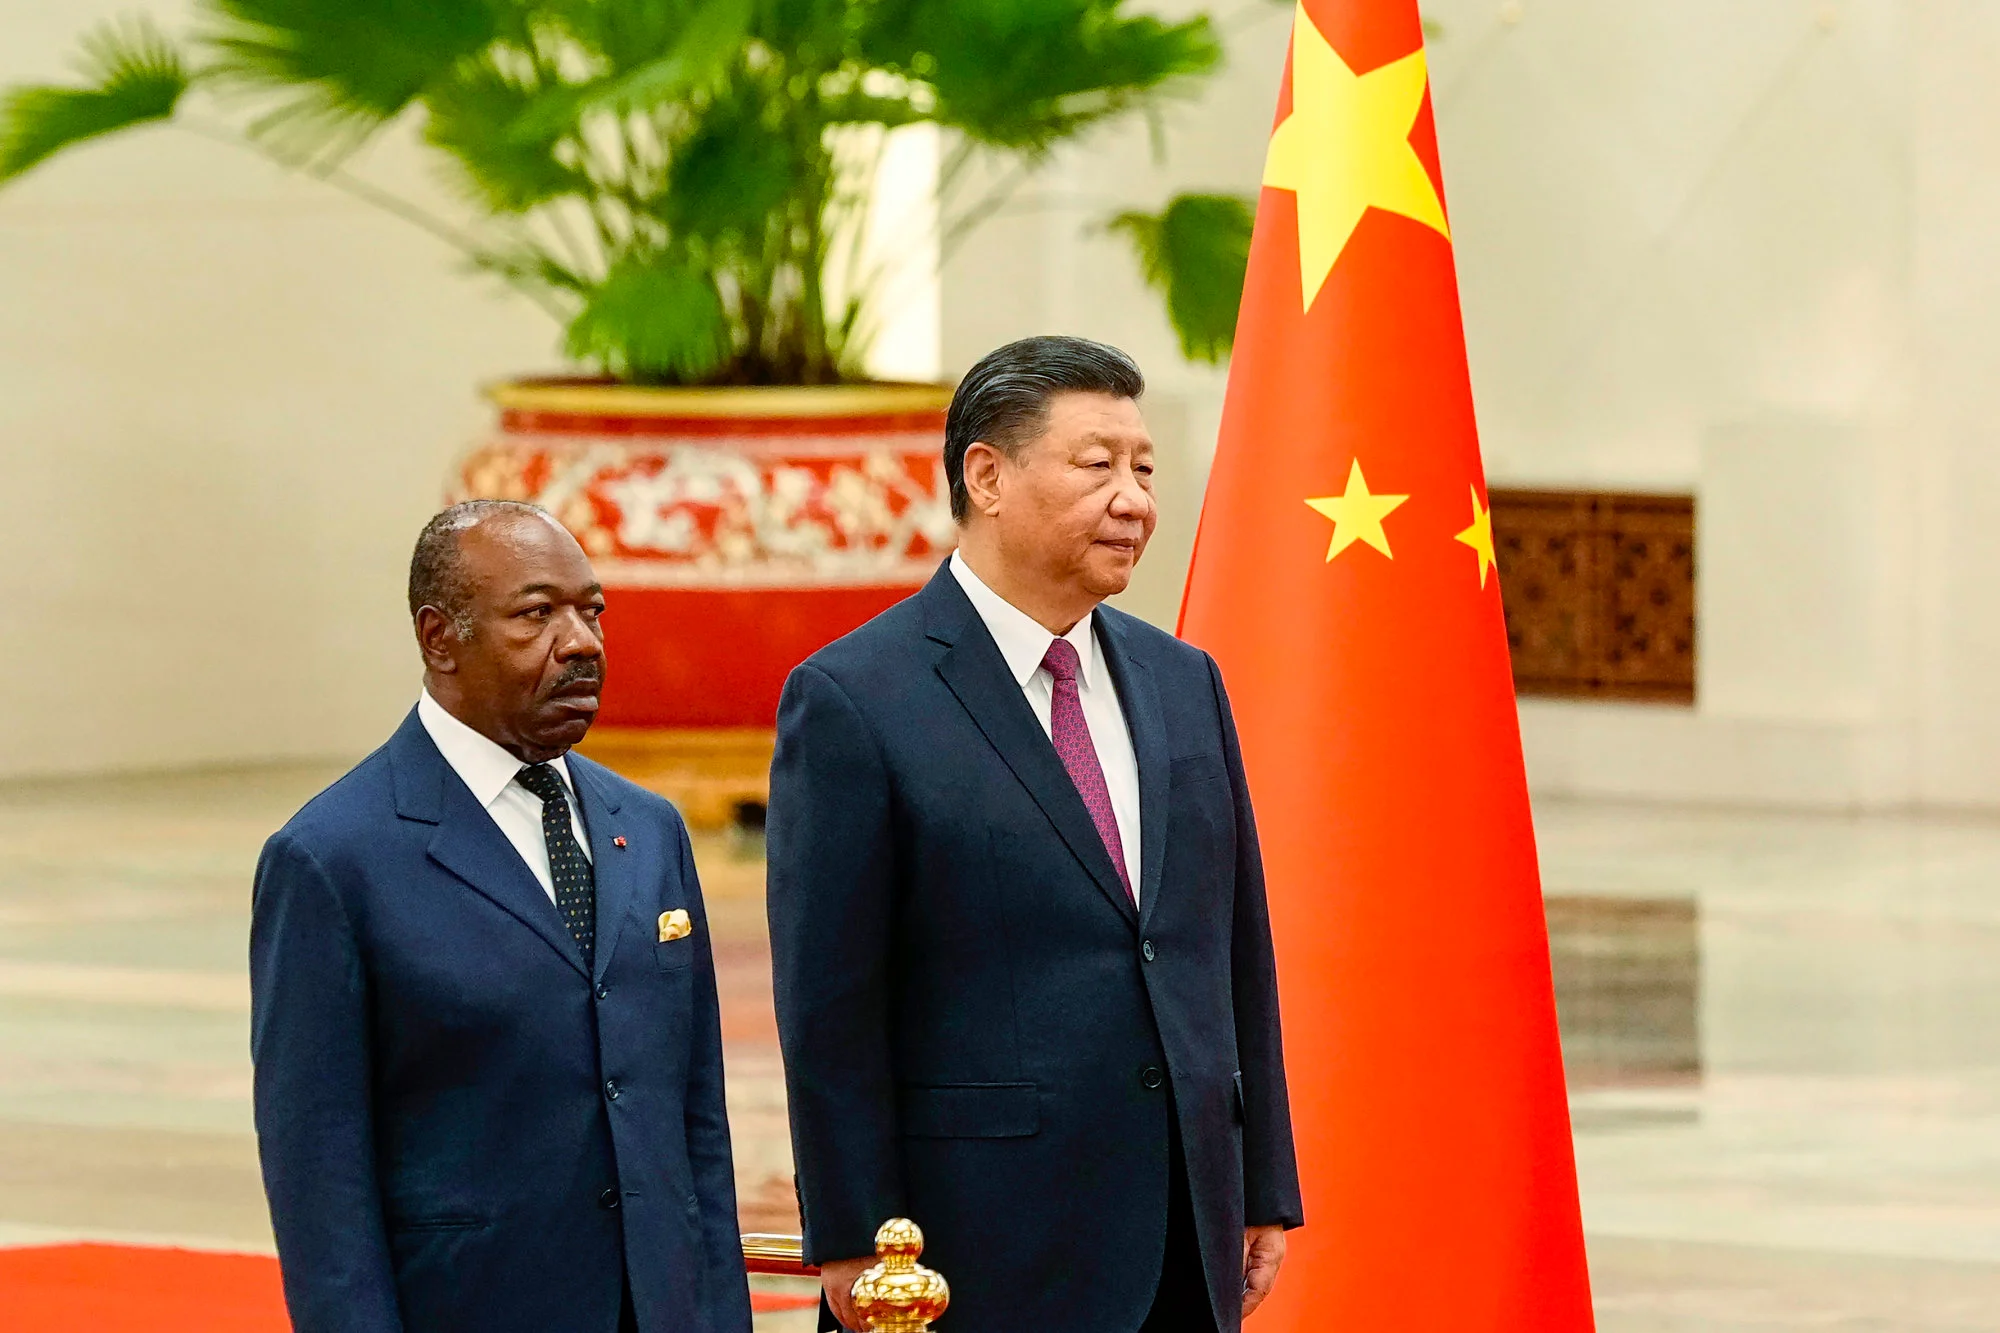 Ousted Ali Bongo nodded to establishment of Chinese military base despite concerns of France, U.S.A.